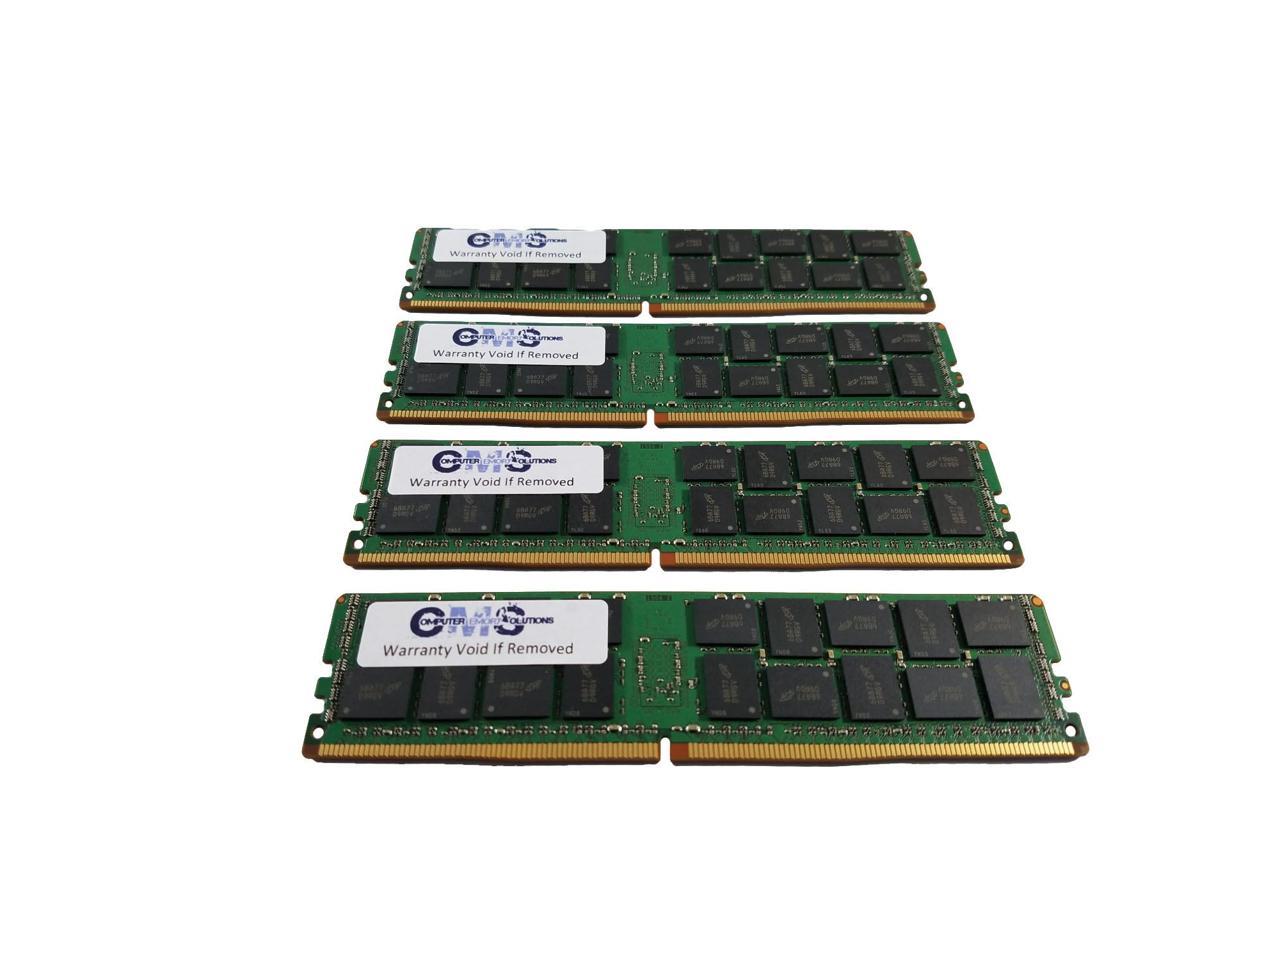 CMS 128GB (4X32GB) DDR4 21300 2666MHZ ECC REGISTERED DIMM Memory Ram  Upgrade Compatible with Dell Precision Workstation 5820 ECC Register - D64